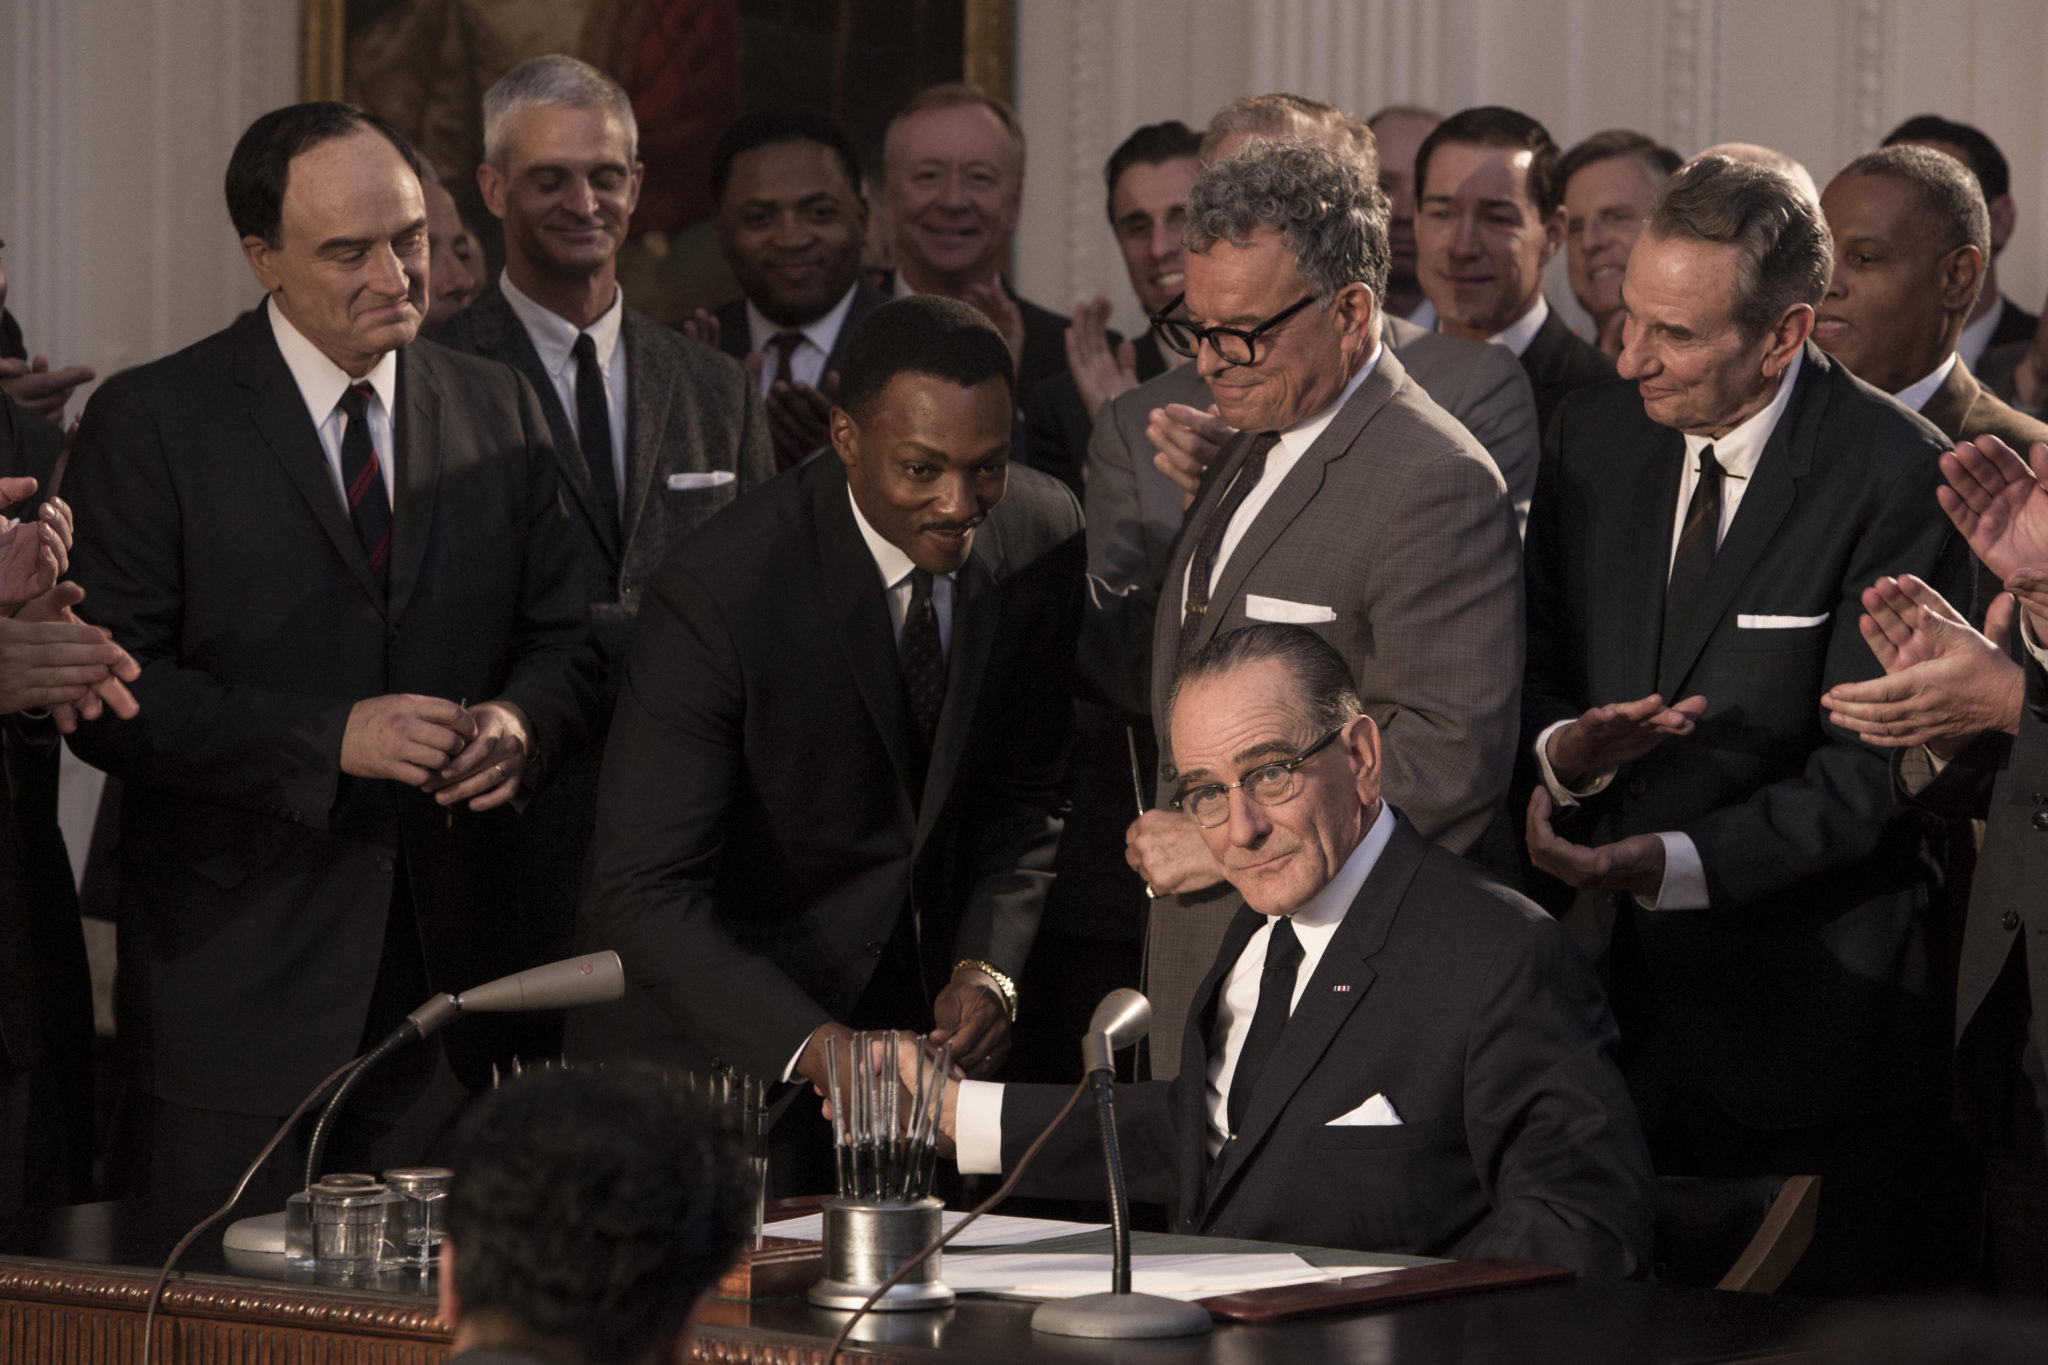 In All the Way, Bryan Cranston delivers a kinder, gentler Lyndon B. Johnson.